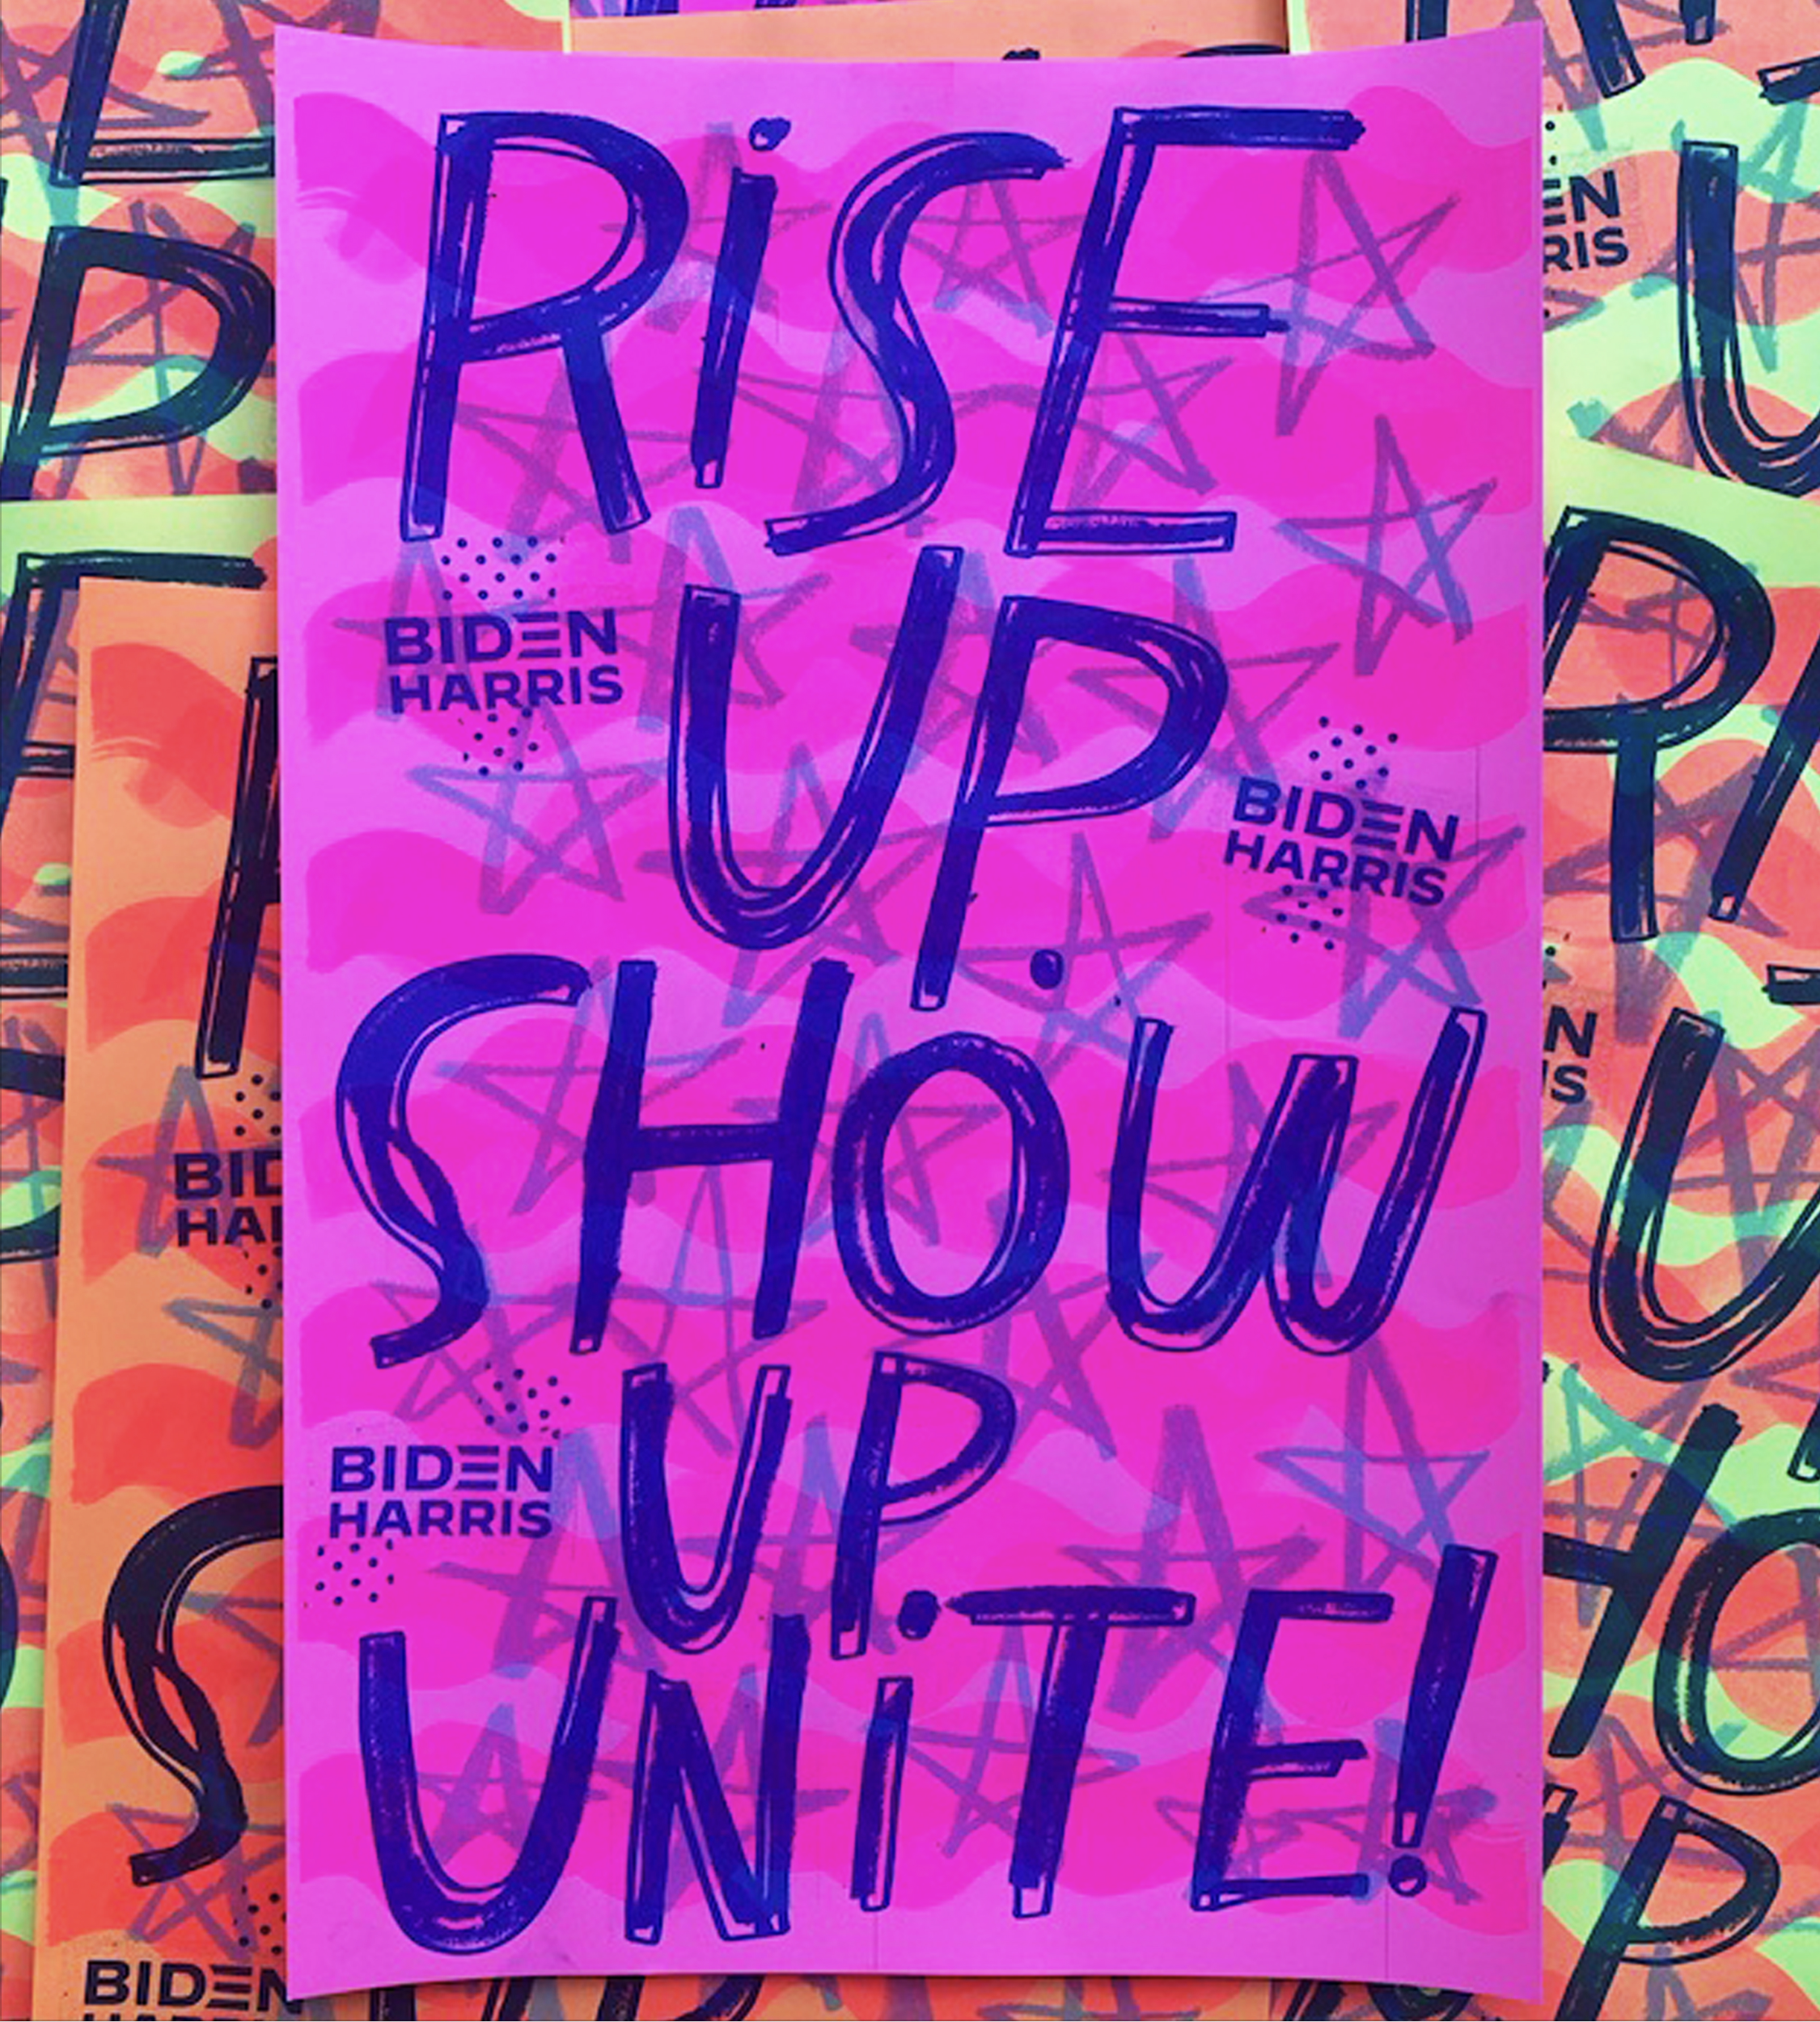 Lettering art of the phrase 'Rise up. Show up. Unite!' by Kate Bingaman-Burt